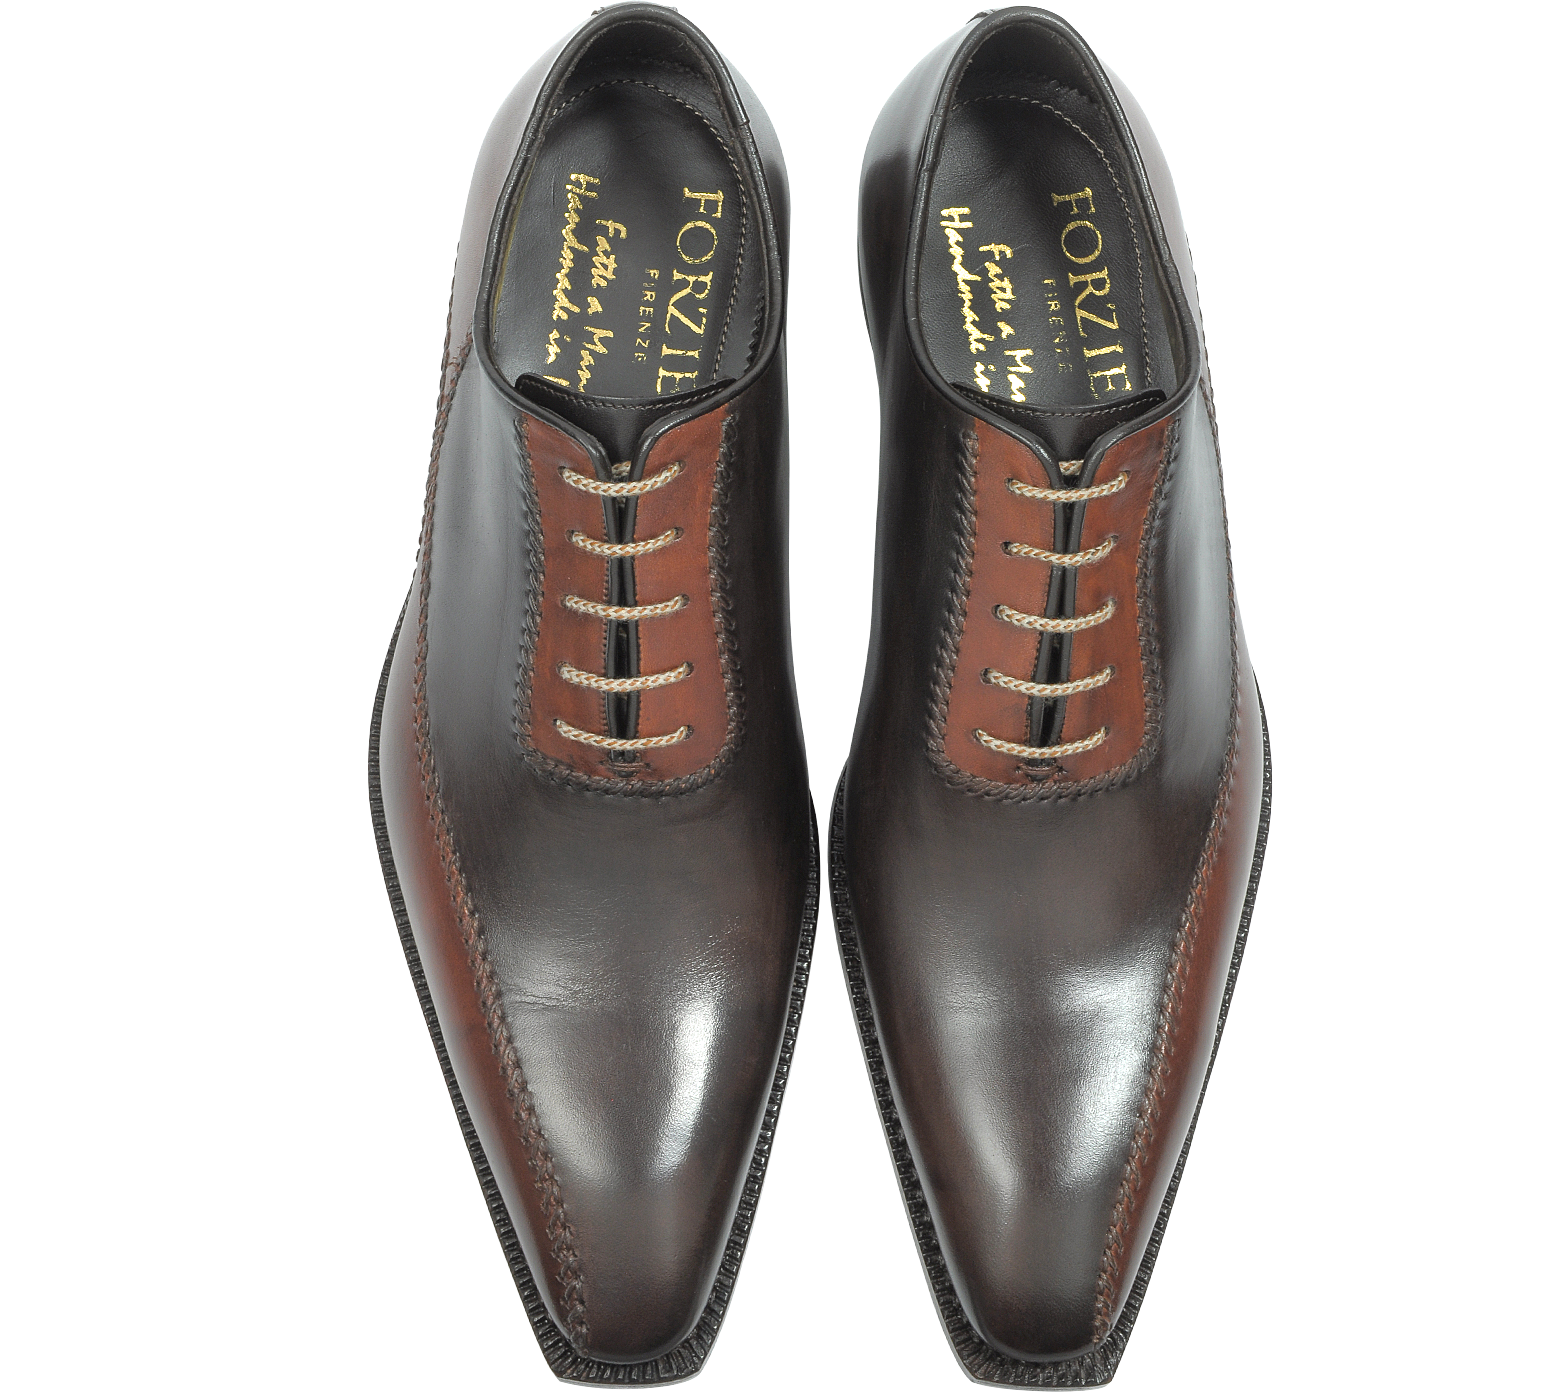 Forzieri Dark Brown Italian Handcrafted Leather Oxford Shoes 6 US | 5.5 UK  | 40 EU at FORZIERI